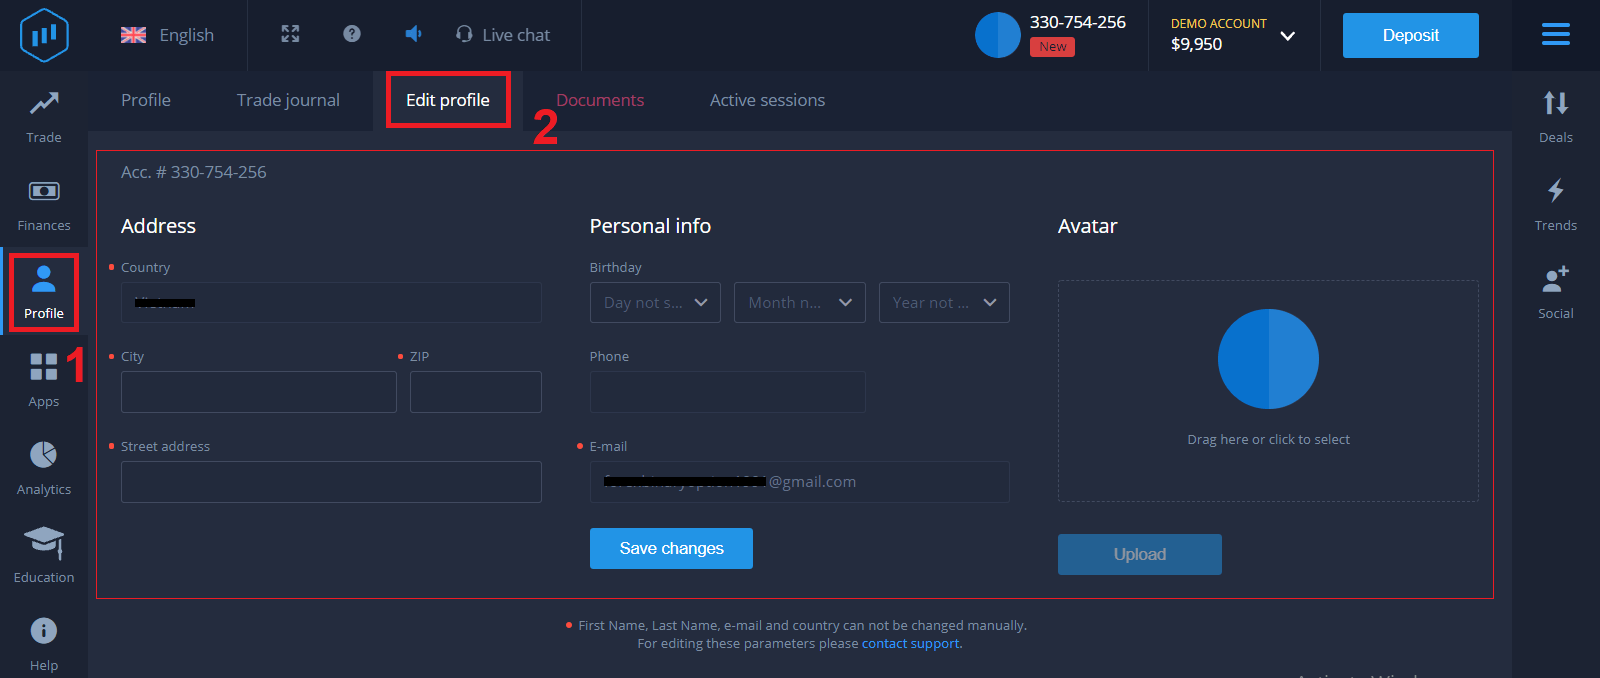 How to Register and Verify Account in ExpertOption